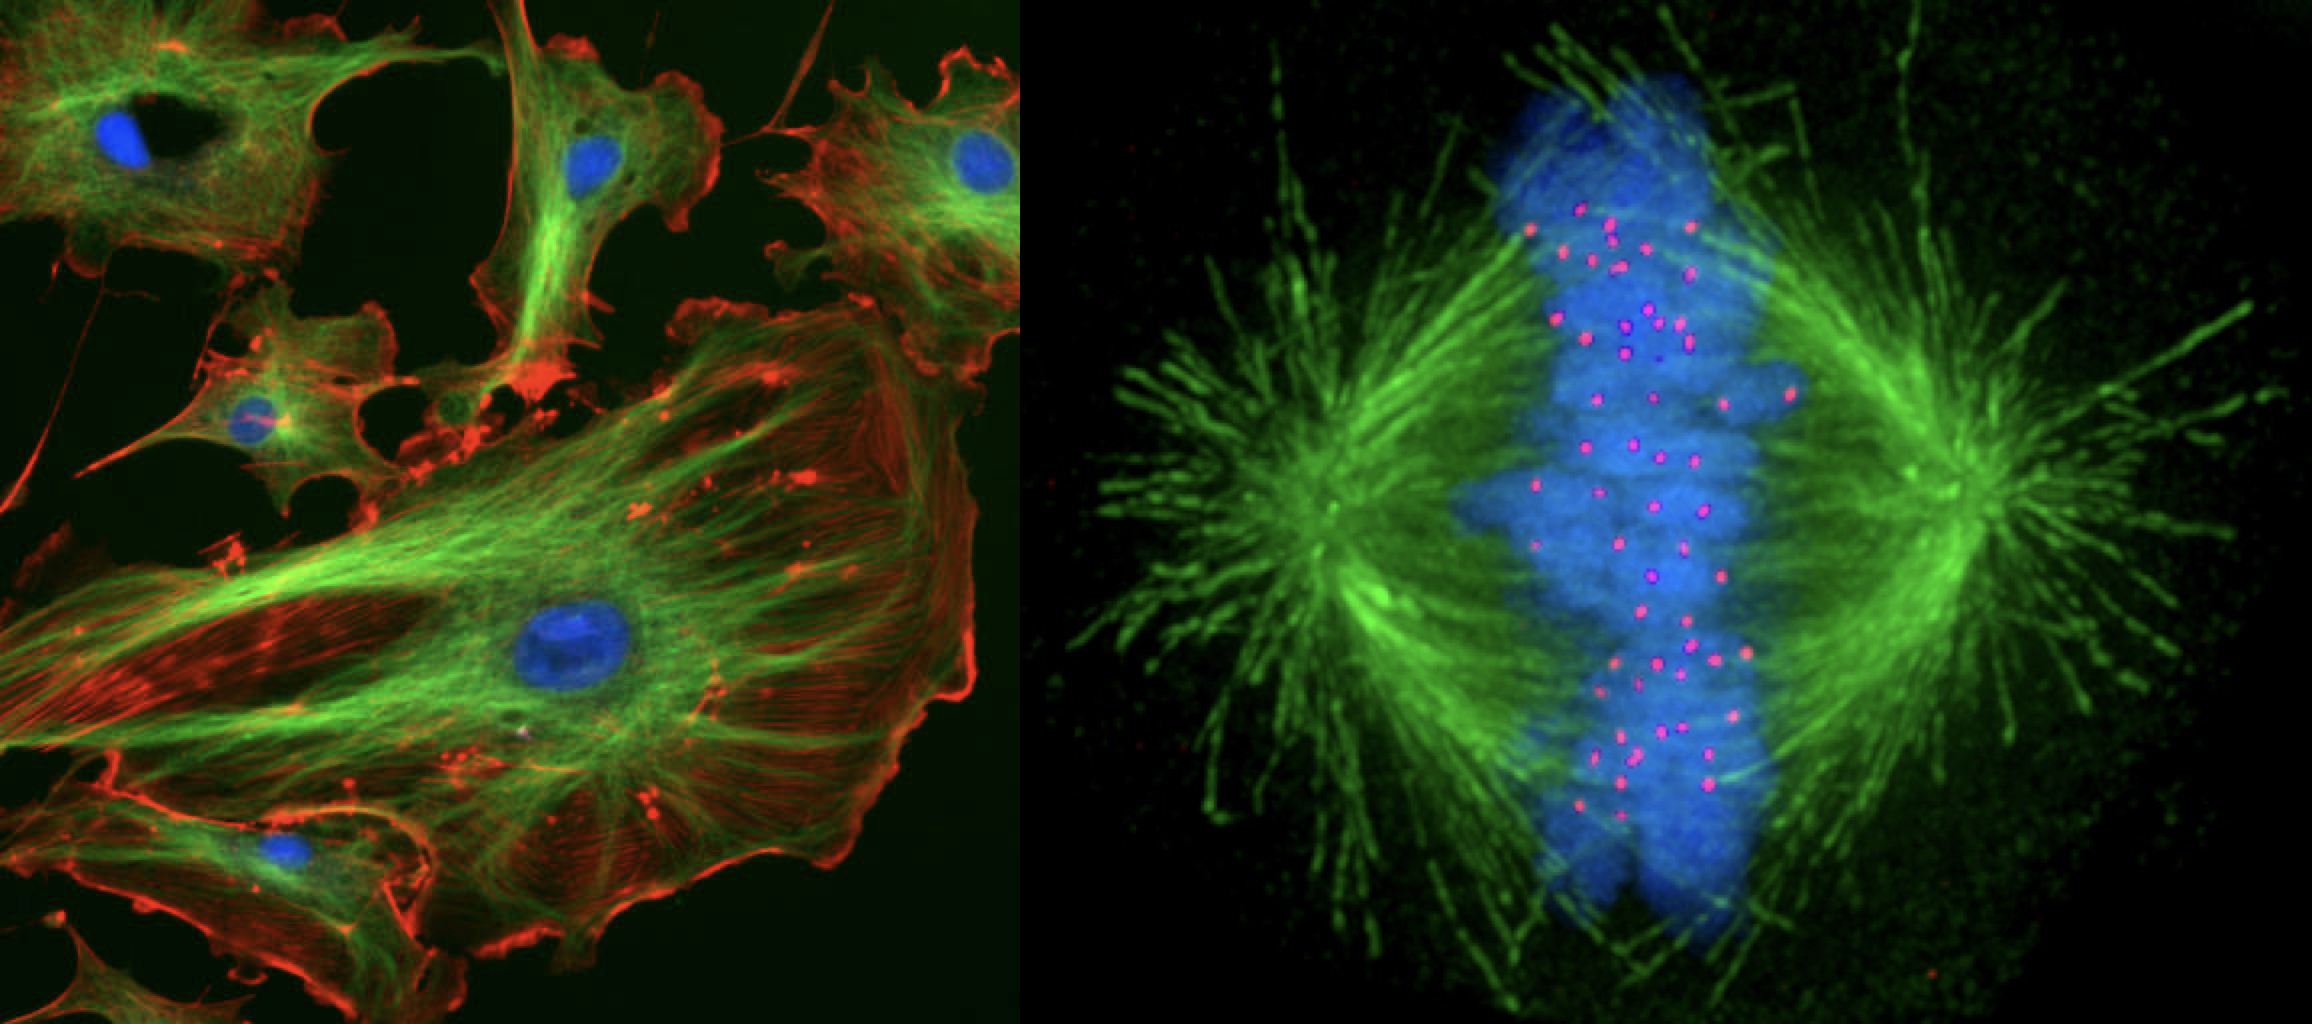 Photomicrographs showing microtubules during normal metabolism and during metaphase of mitosis.